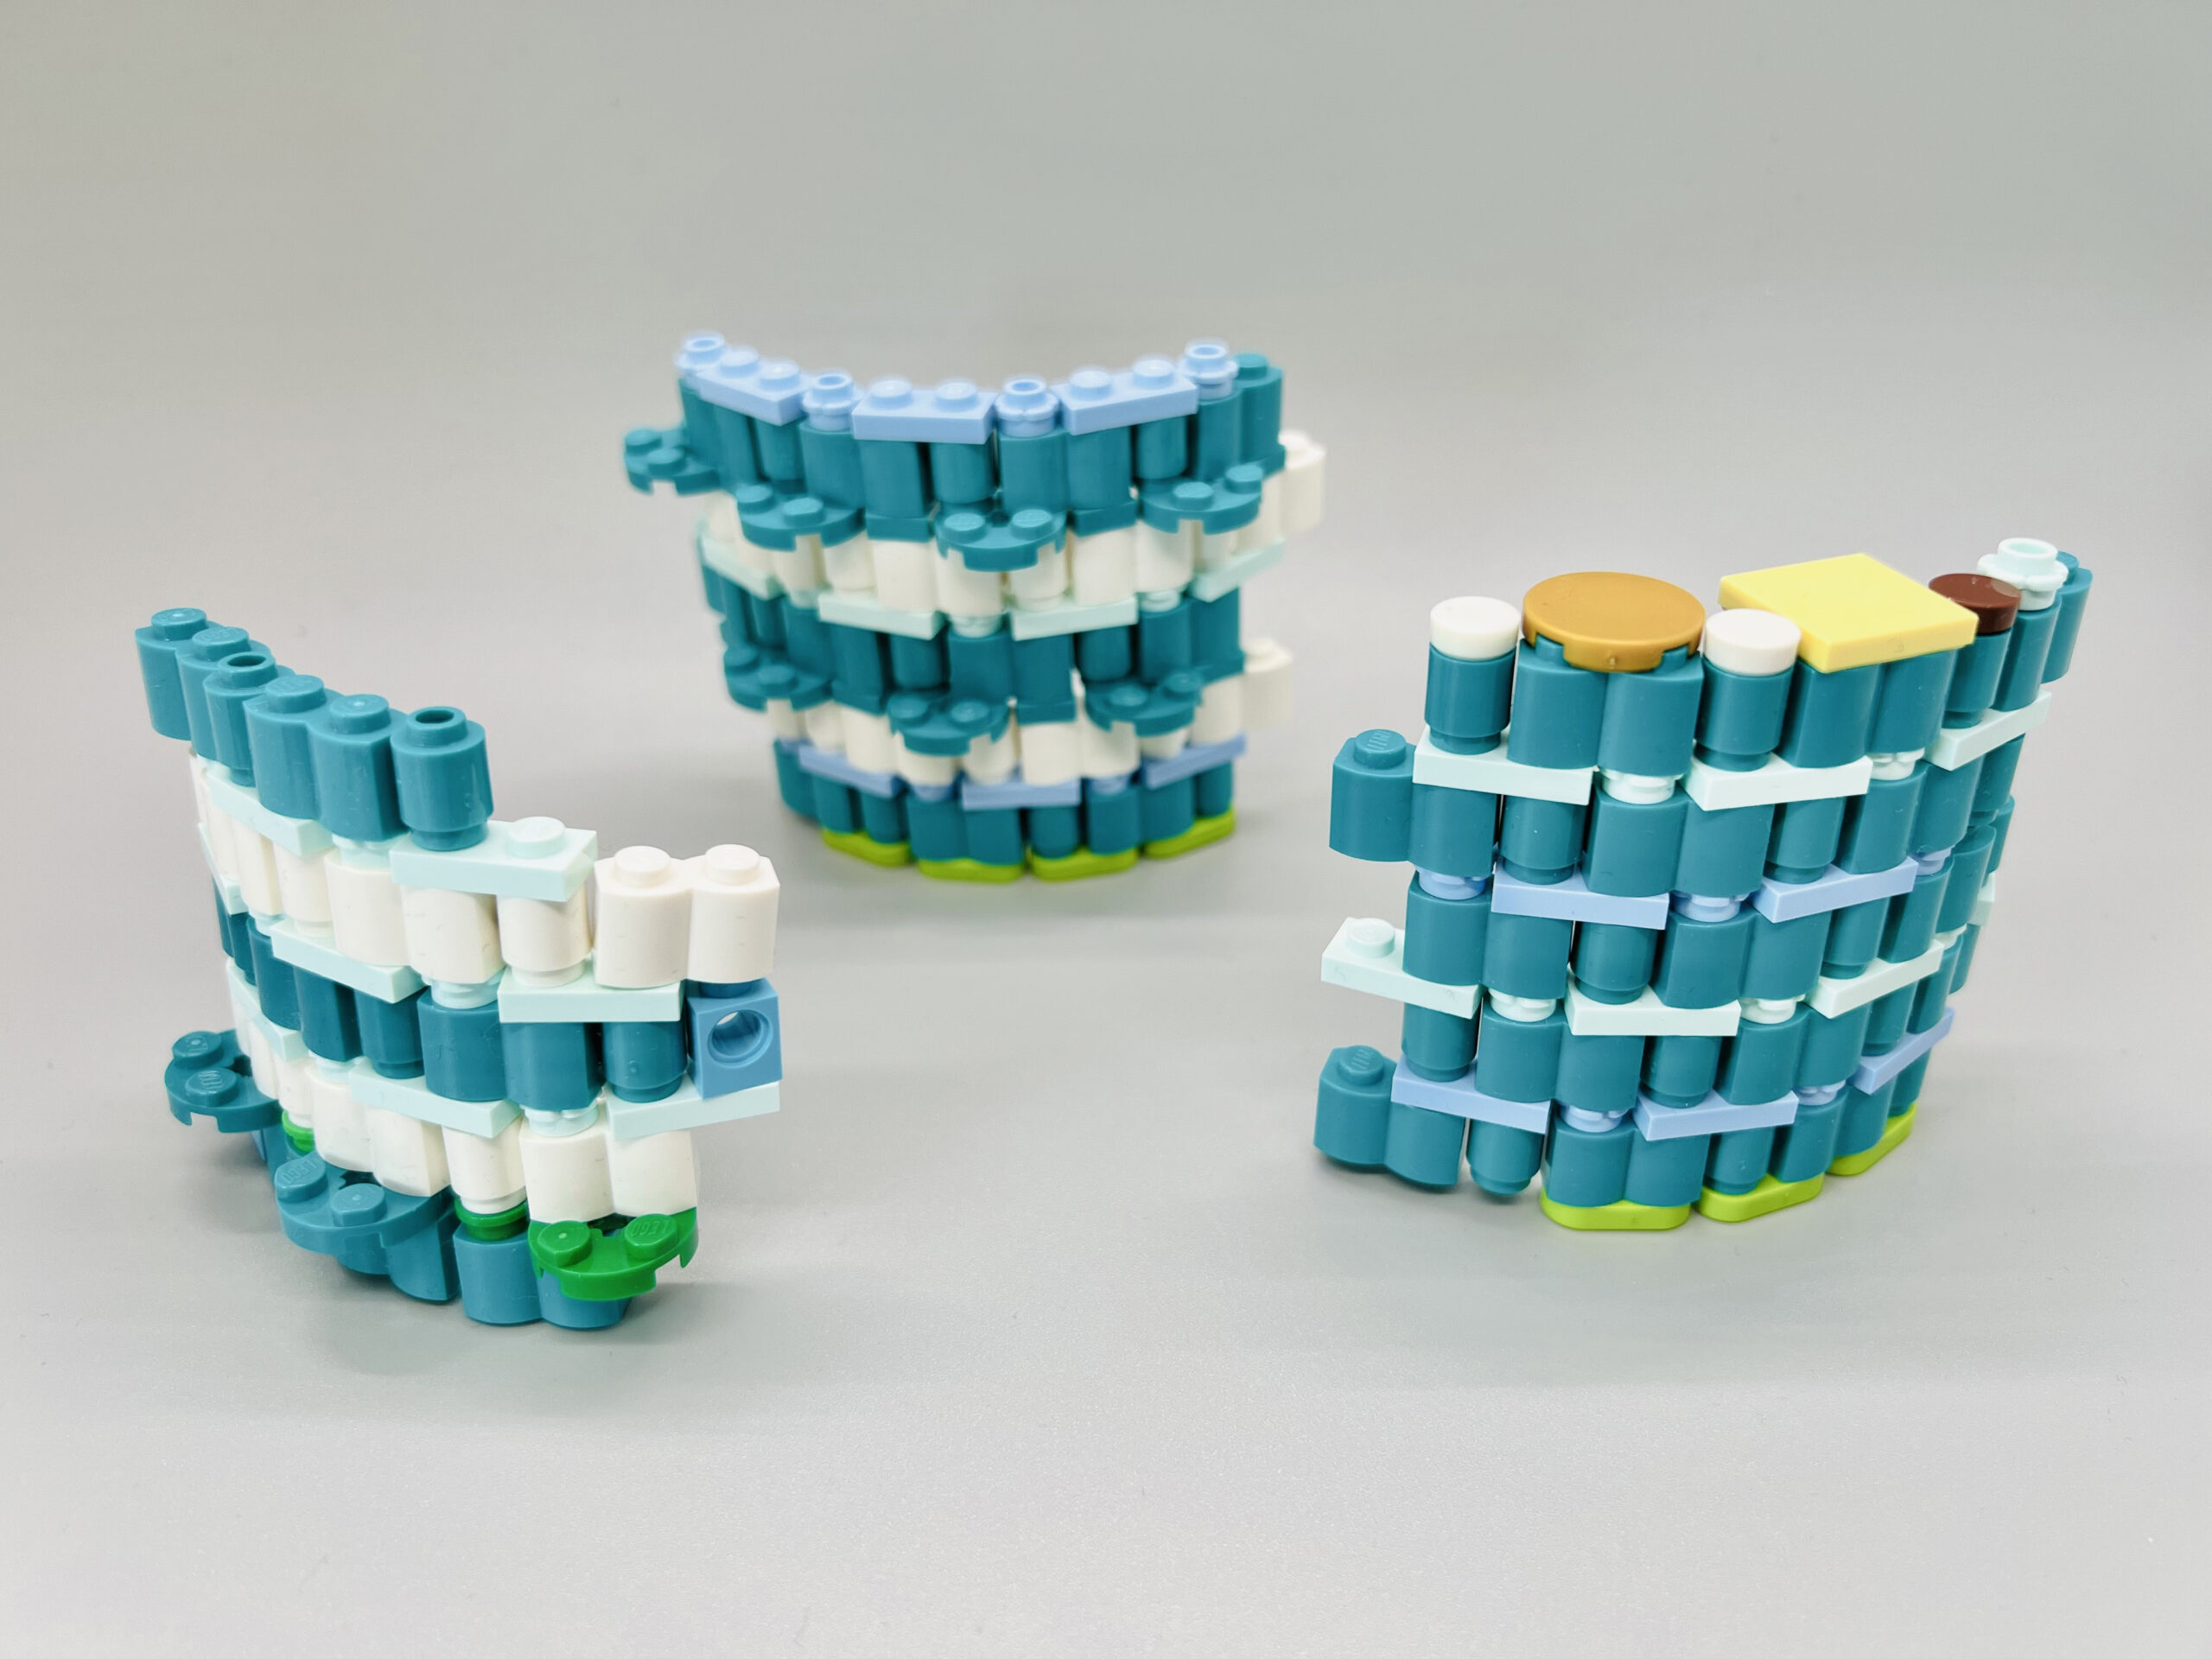 Dark turquoise hoops made of repeating 2x1 palisade bricks and 1x1 round plates.